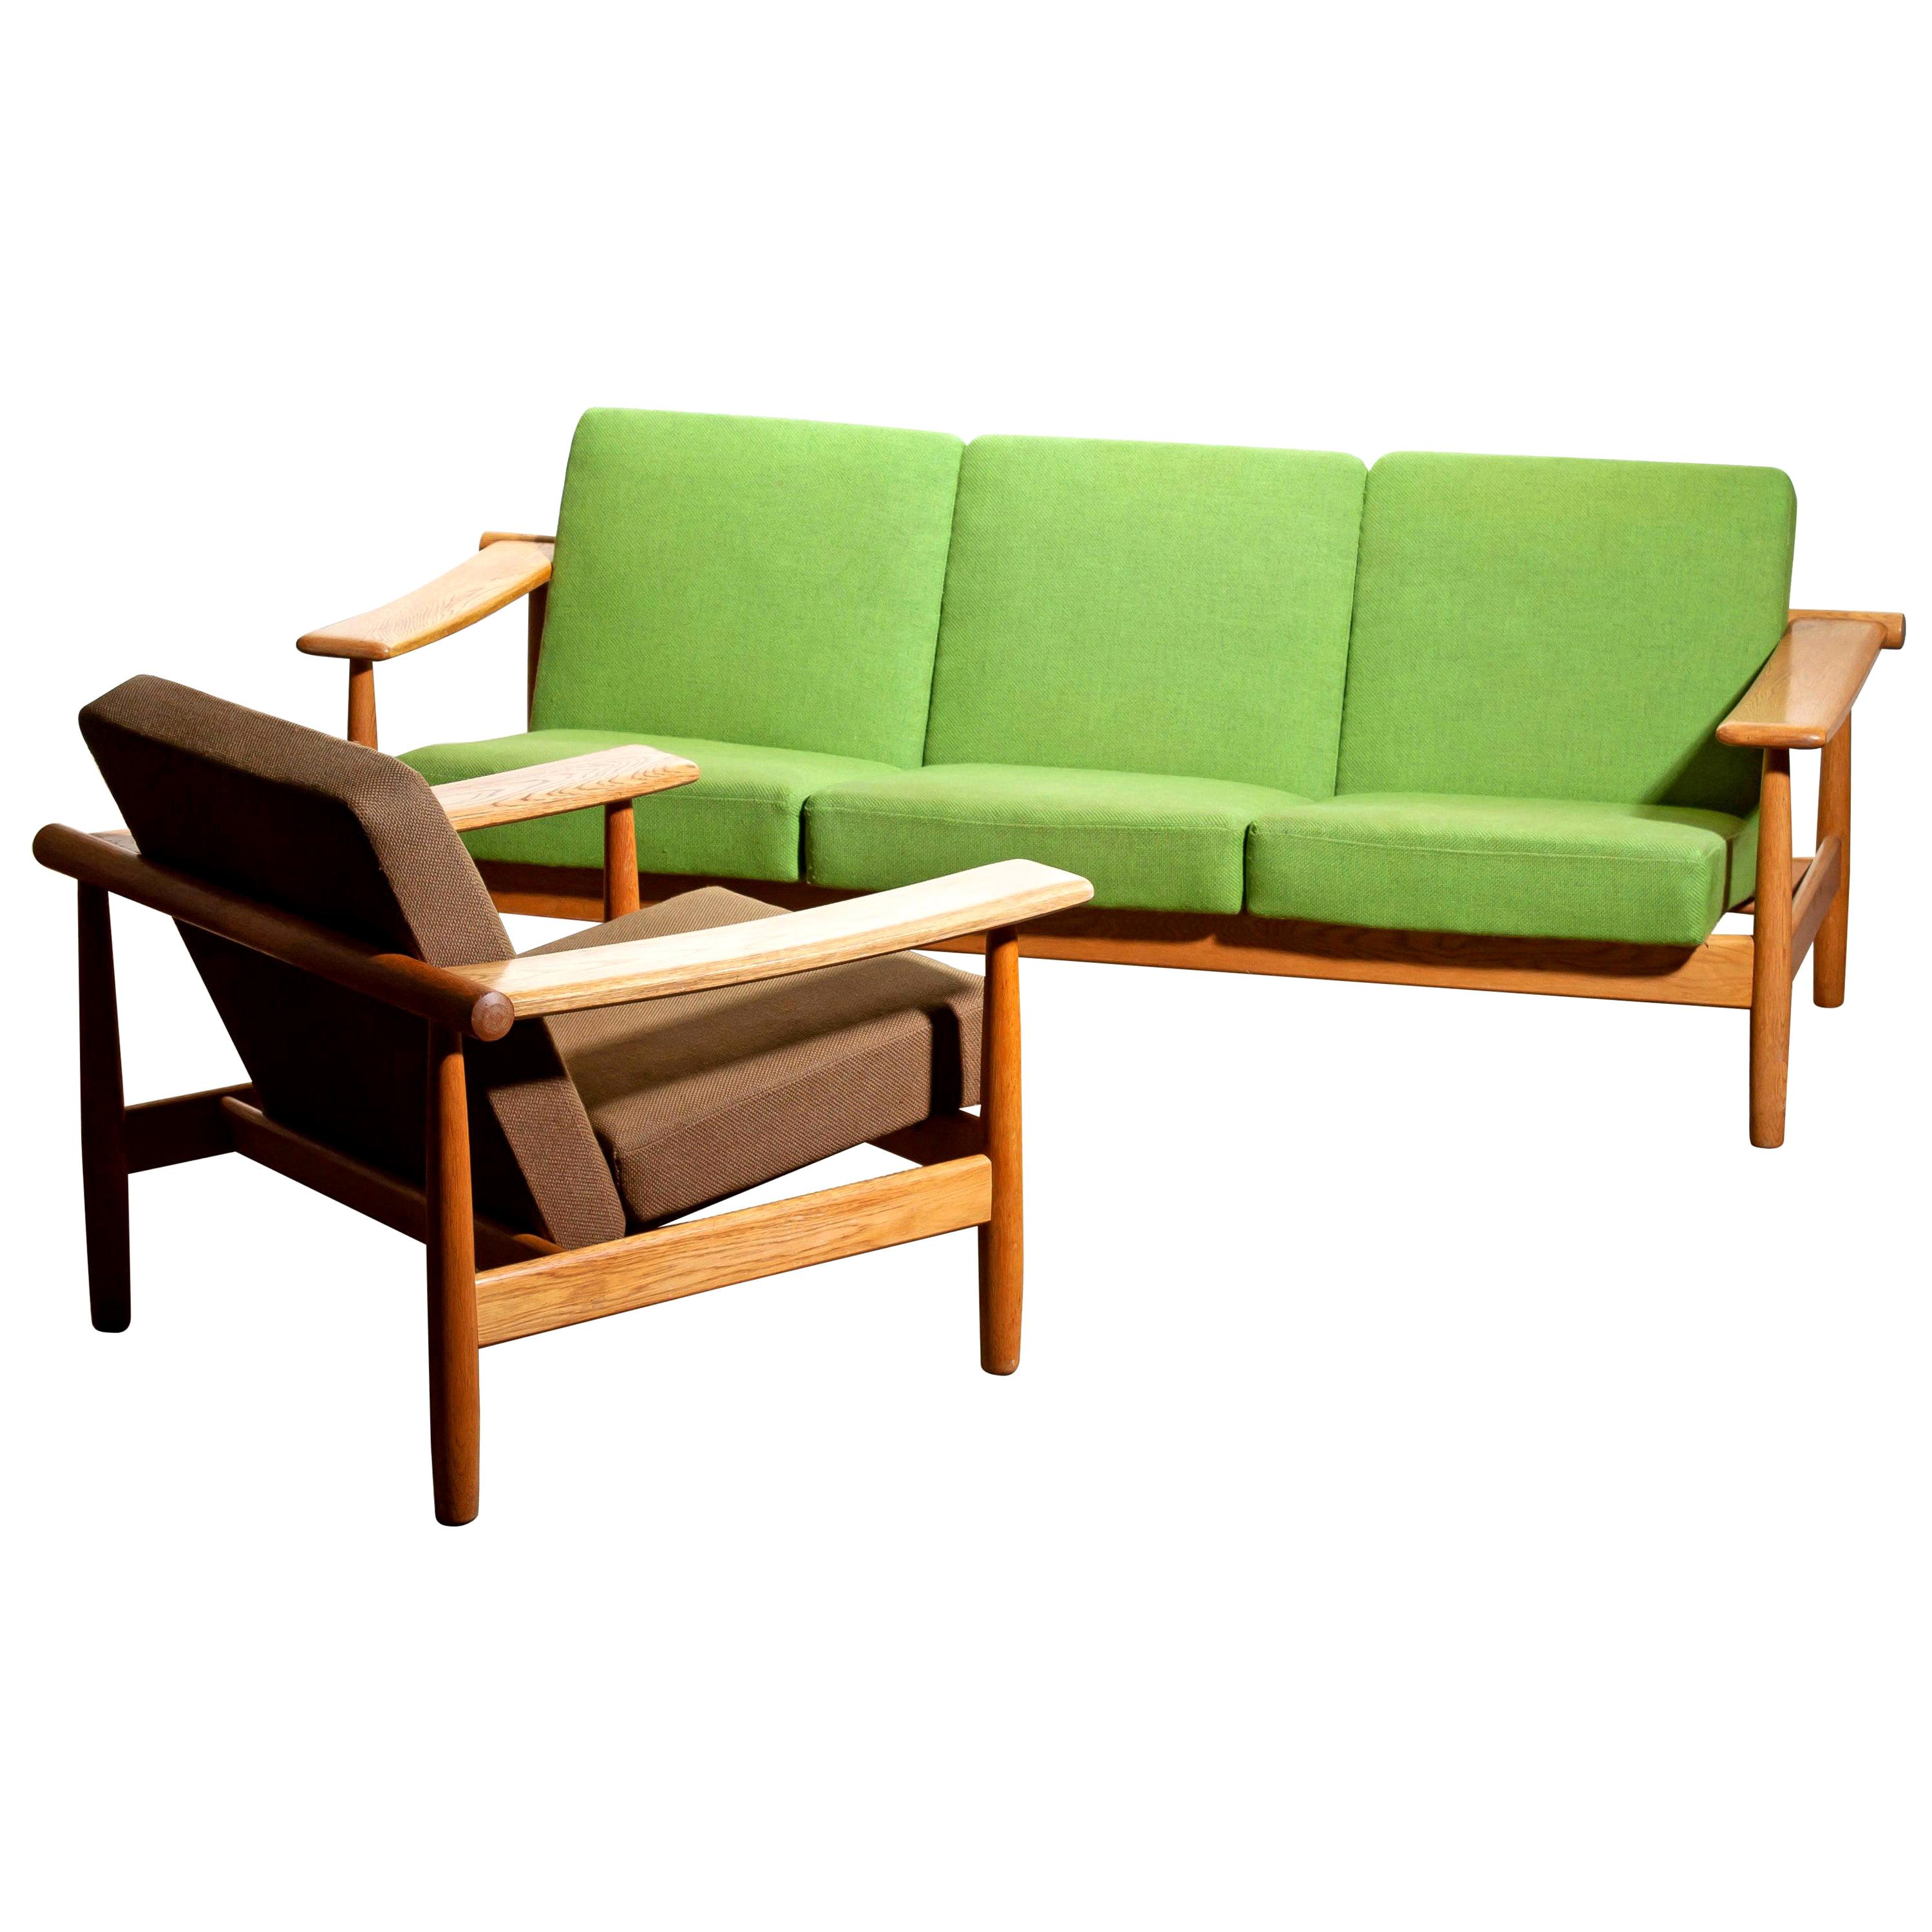 Beautiful oak sofa and lounge chair or living room set from the 1960s made in Denmark.
The oak frames are in good condition.
The fabric is in fair condition like the pictures shows.
Beautiful set!